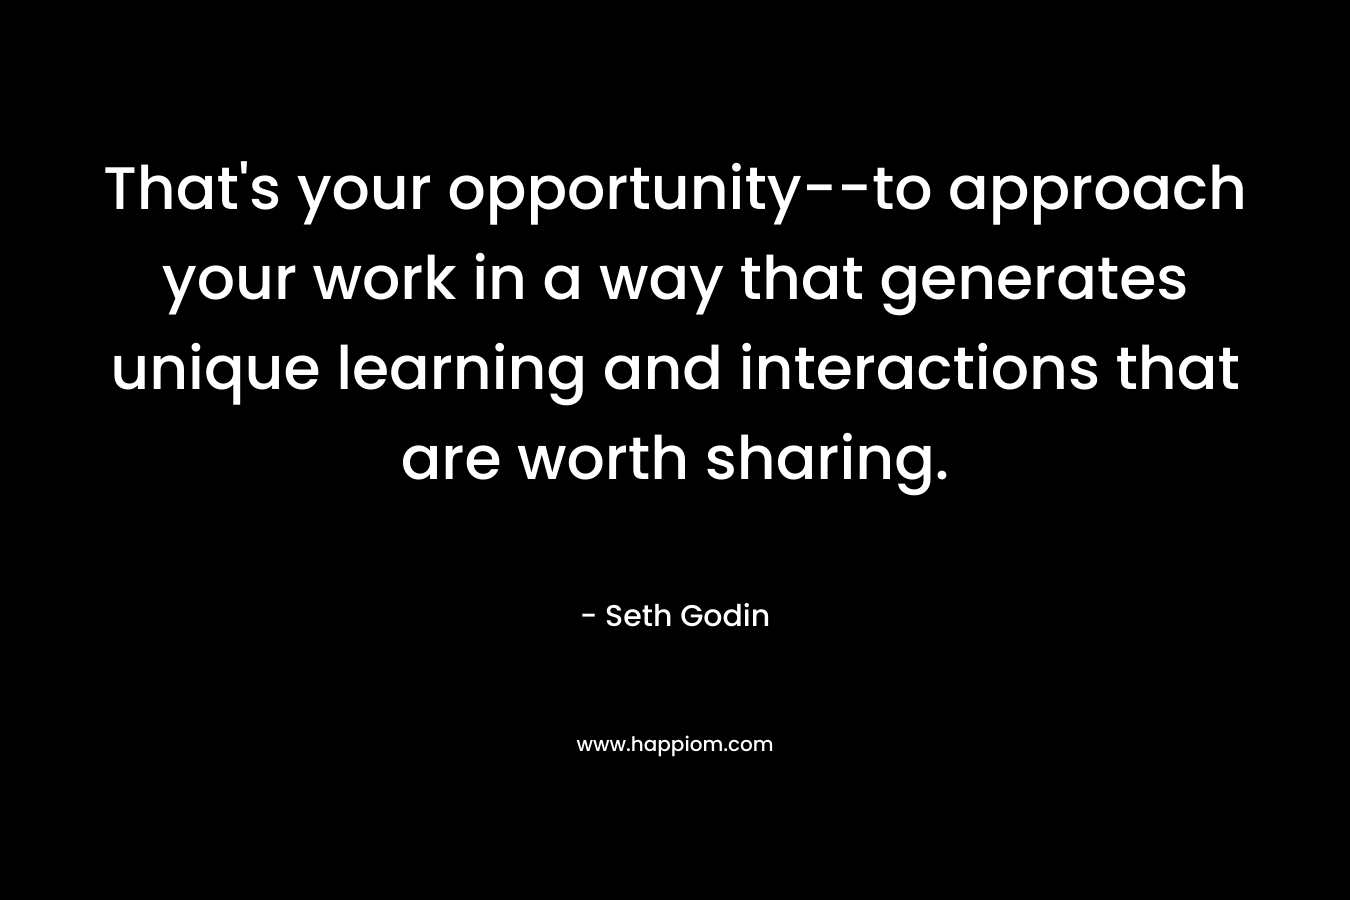 That's your opportunity--to approach your work in a way that generates unique learning and interactions that are worth sharing.